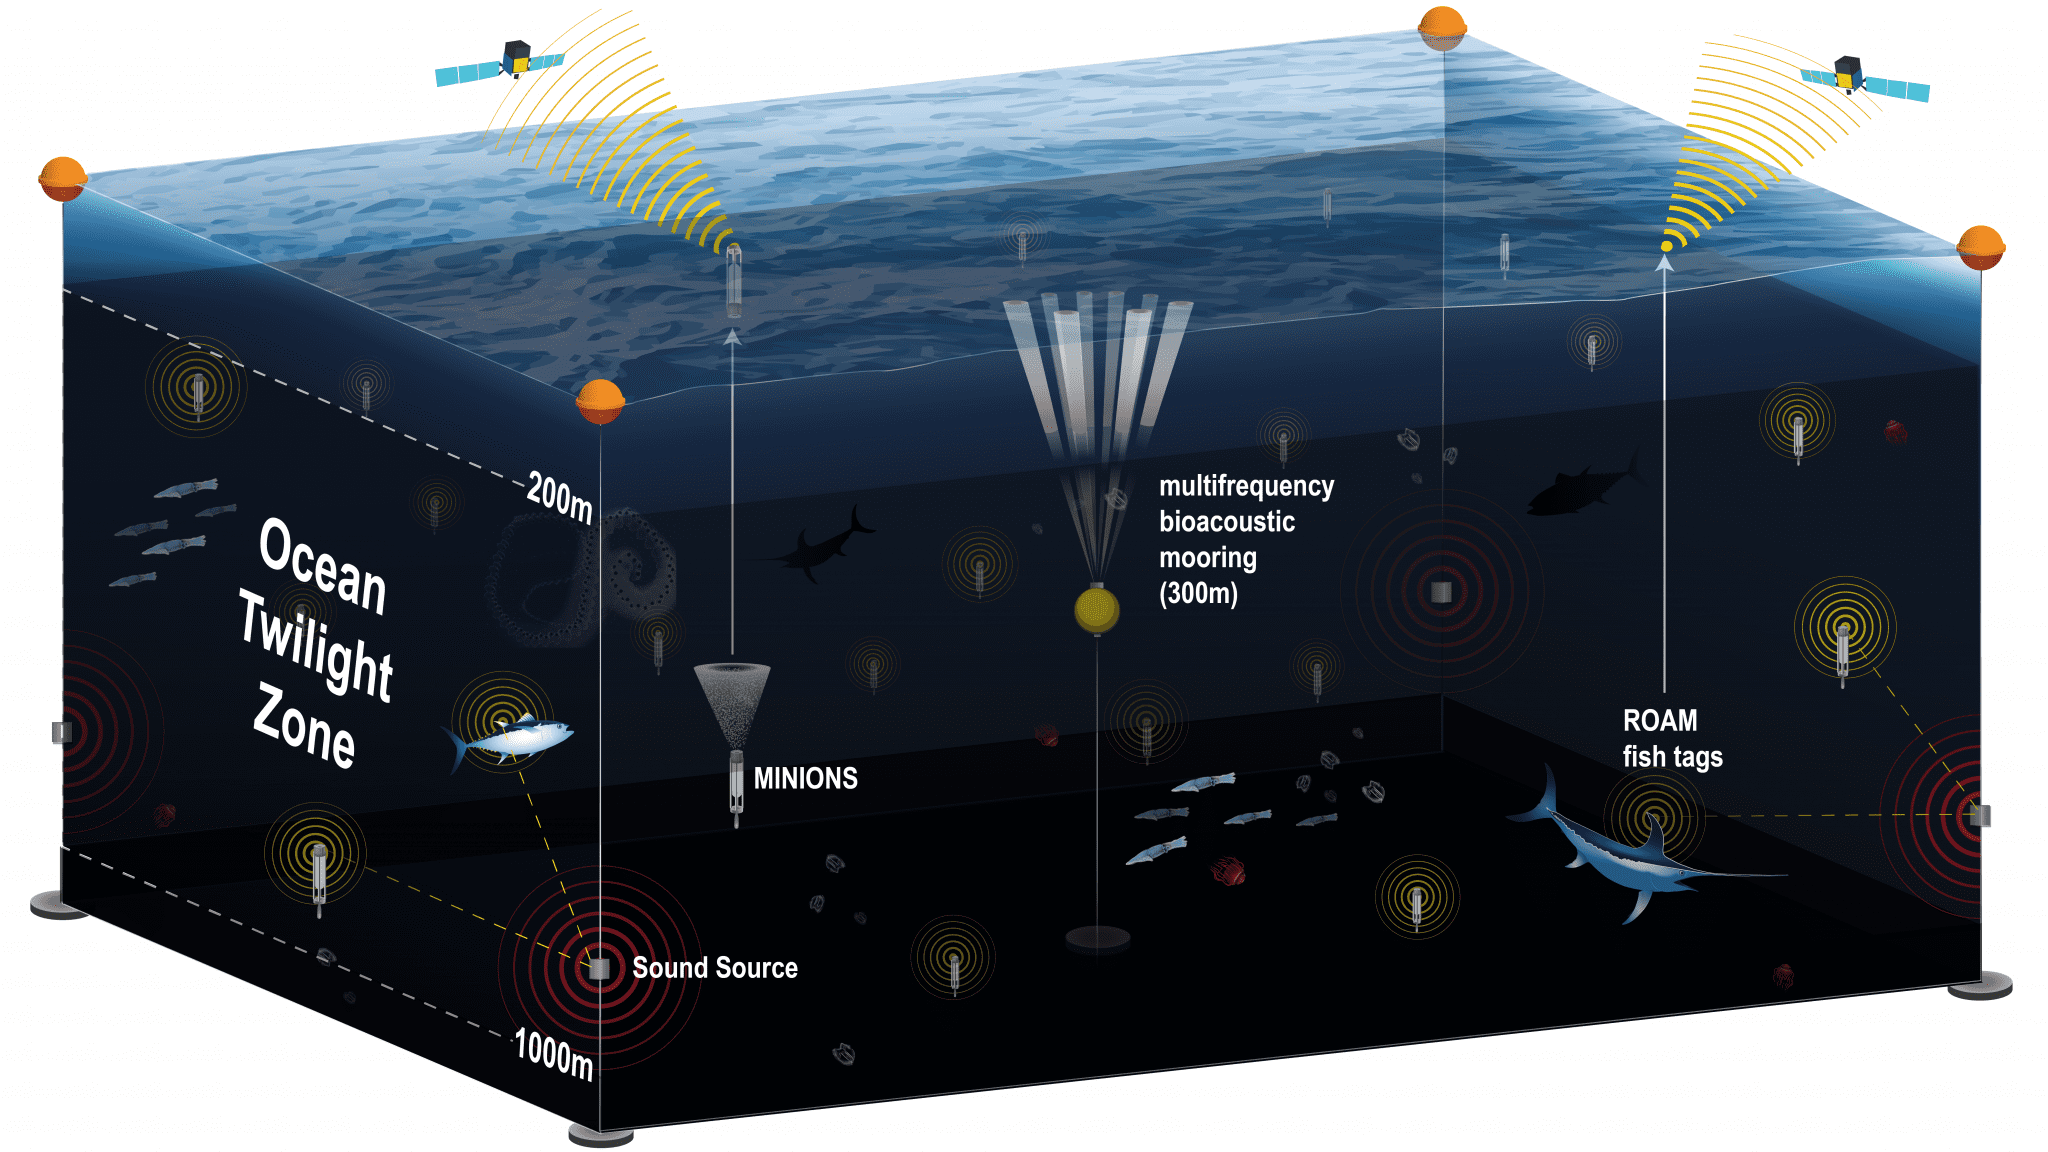 A new observation network will give scientists a comprehensive view of the twilight zone, or mesopelagic. It will use several different technologies including moored buoys equipped with acoustic survey systems; a swarm of optical and geochemical sensors; and new fish-tracking tags that will continuously record the position of major predators such as sharks and tuna. All of these components will connect to the network’s buoys using acoustic signals underwater and an Iridium satellite link at the surface.